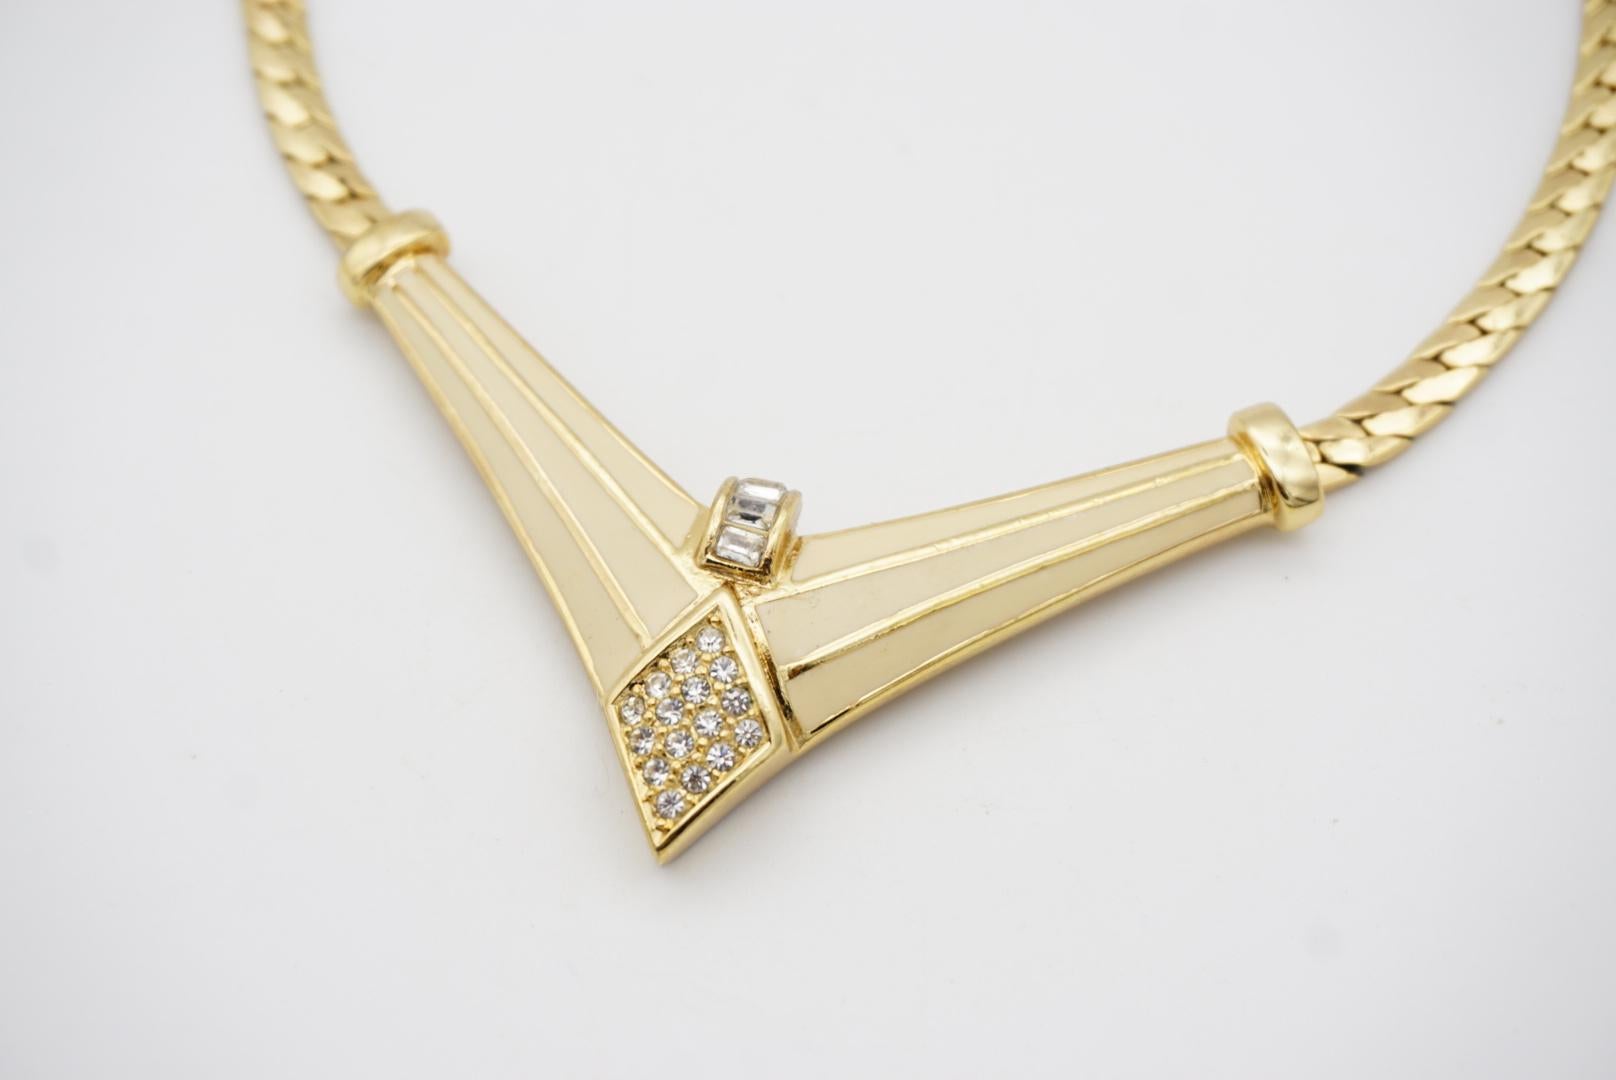 Christian Dior Vintage 1980s Beige Triangle Diamond Crystals Pendant Necklace For Sale 4